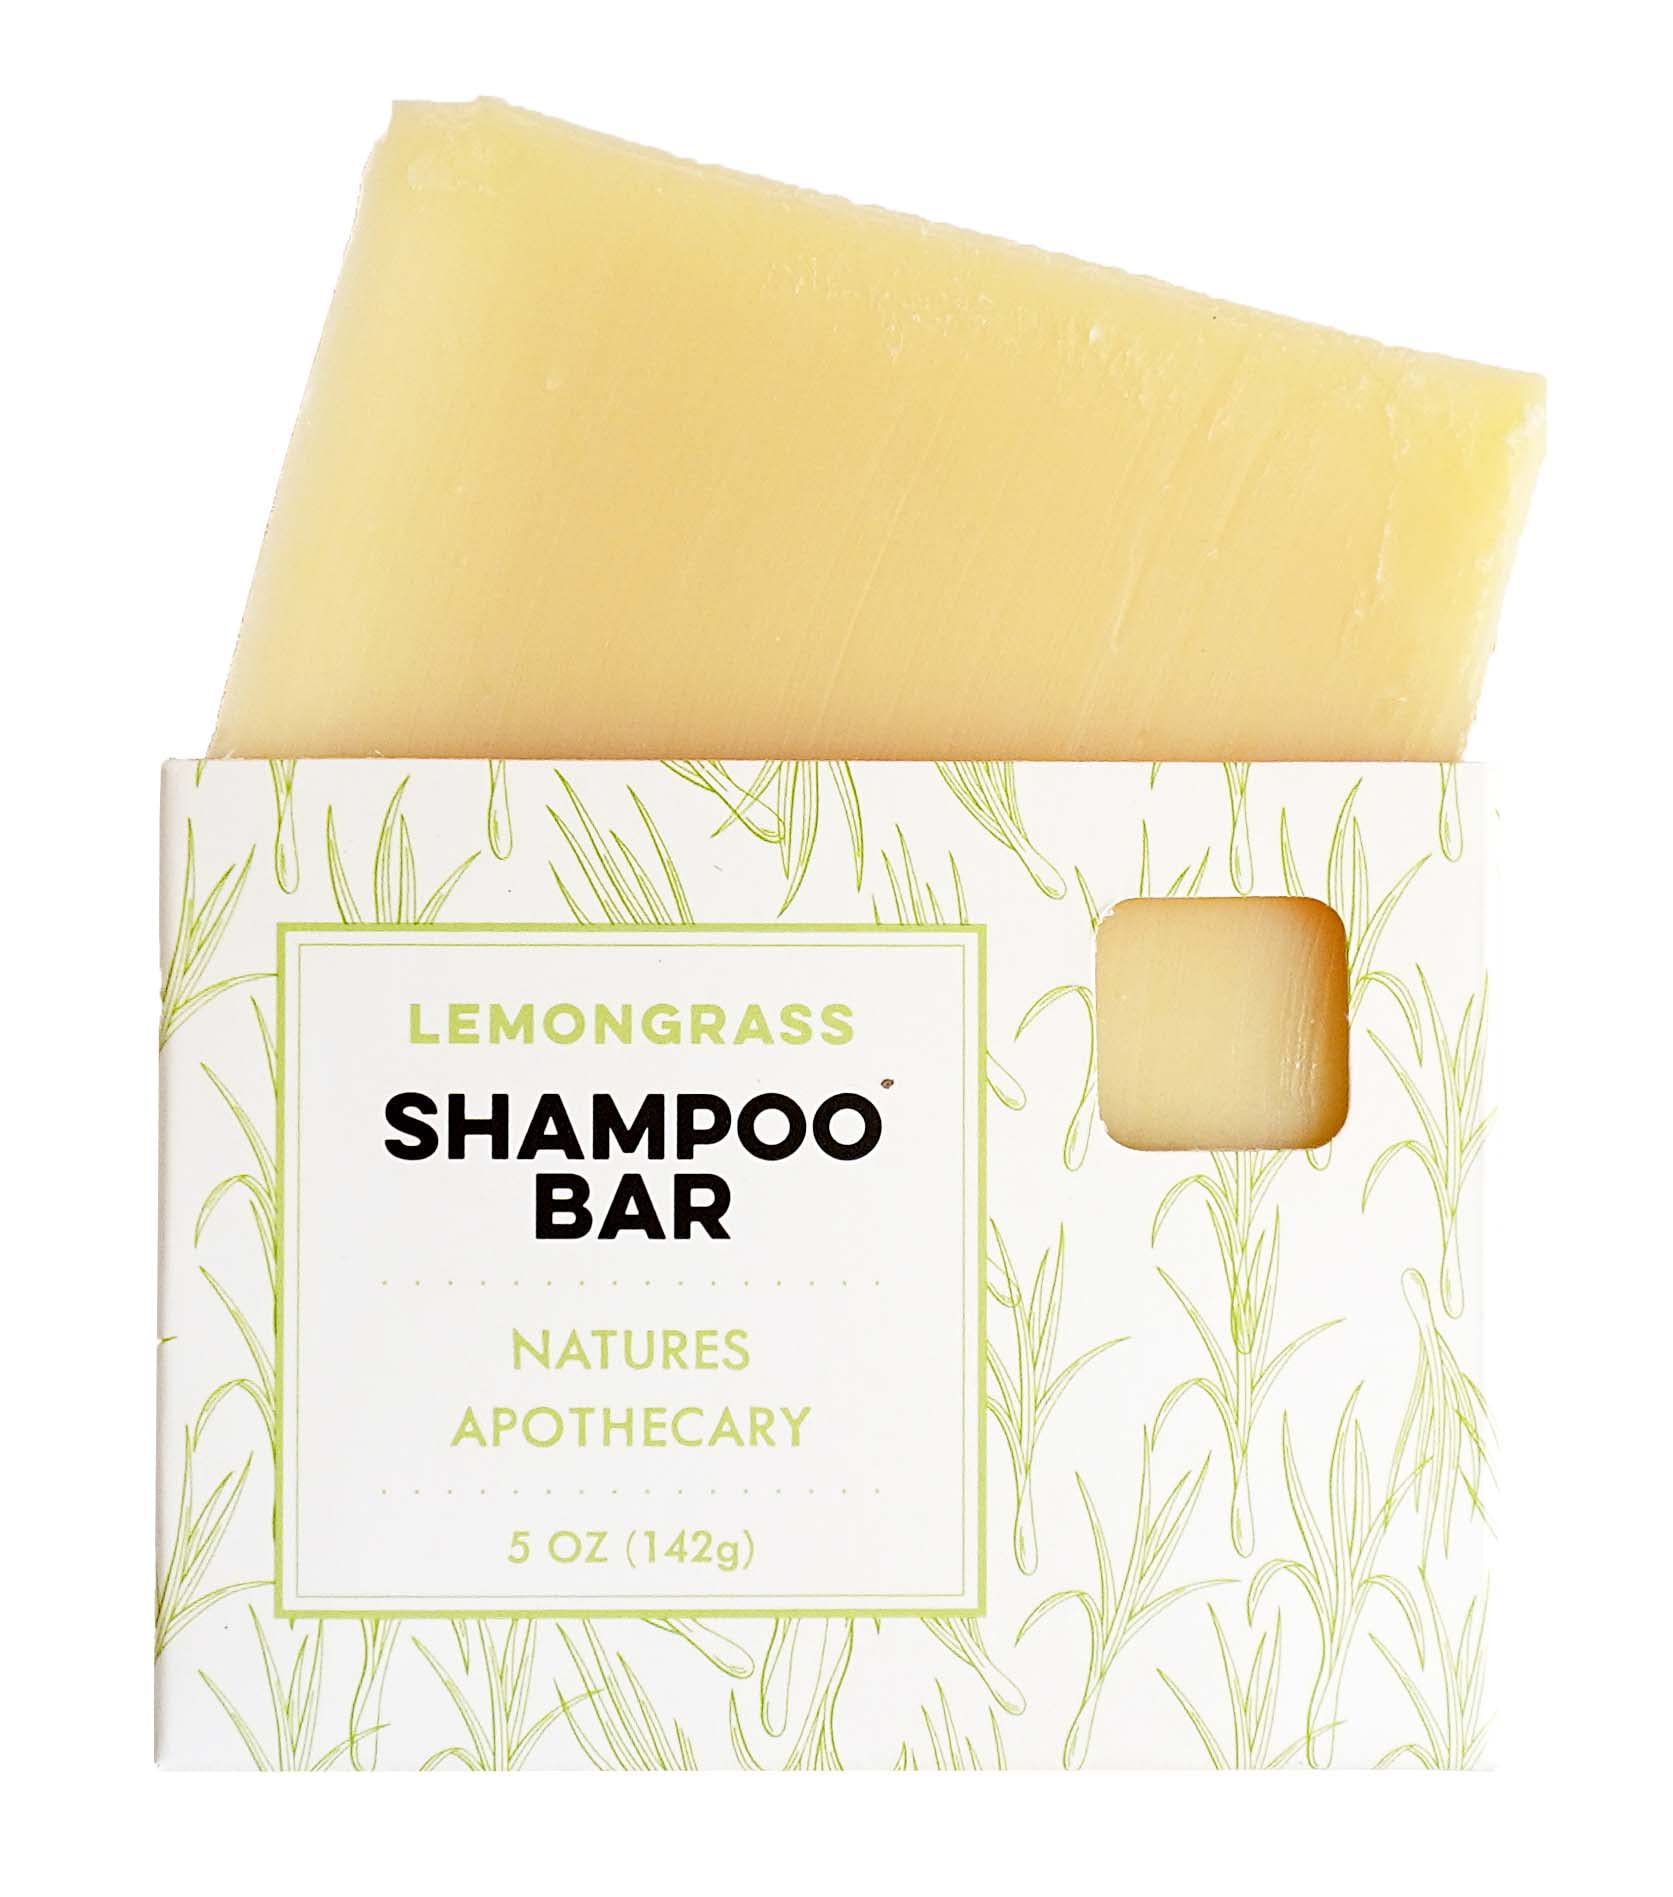 Nature's Apothecary Lemongrass Solid All-Natural Shampoo Bar, Handmade in USA with Plant Based Ingredients. Eco-Friendly, Vegan, Sulfate Free & Cruelty Free. All Hair Types, Large 5 oz. Bar.